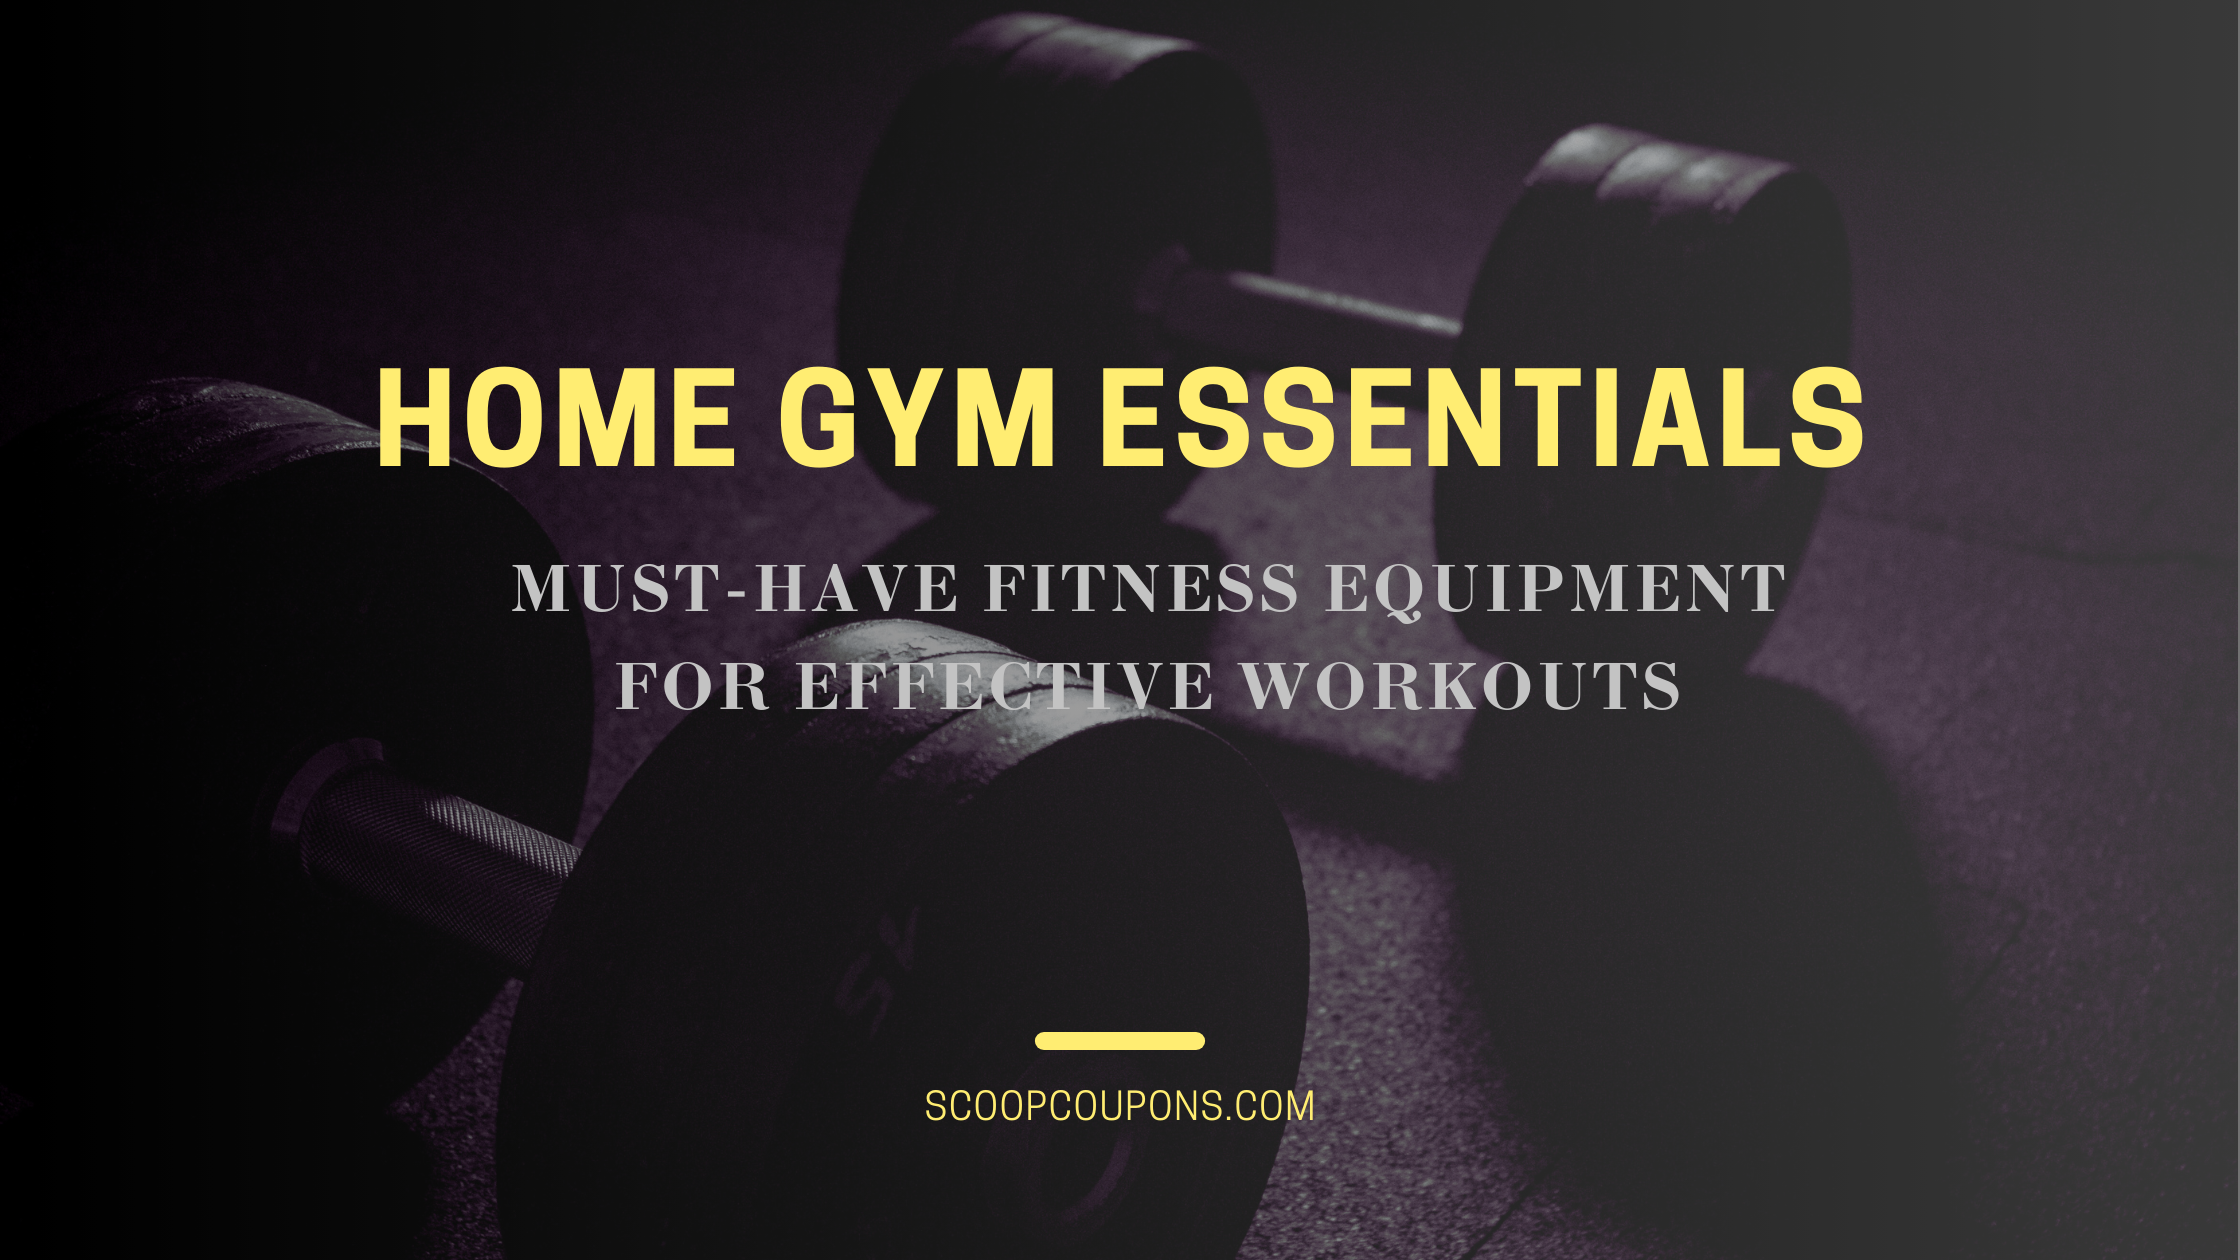 Home Gym Essentials: Must-Have Fitness Equipment For Effective Workouts